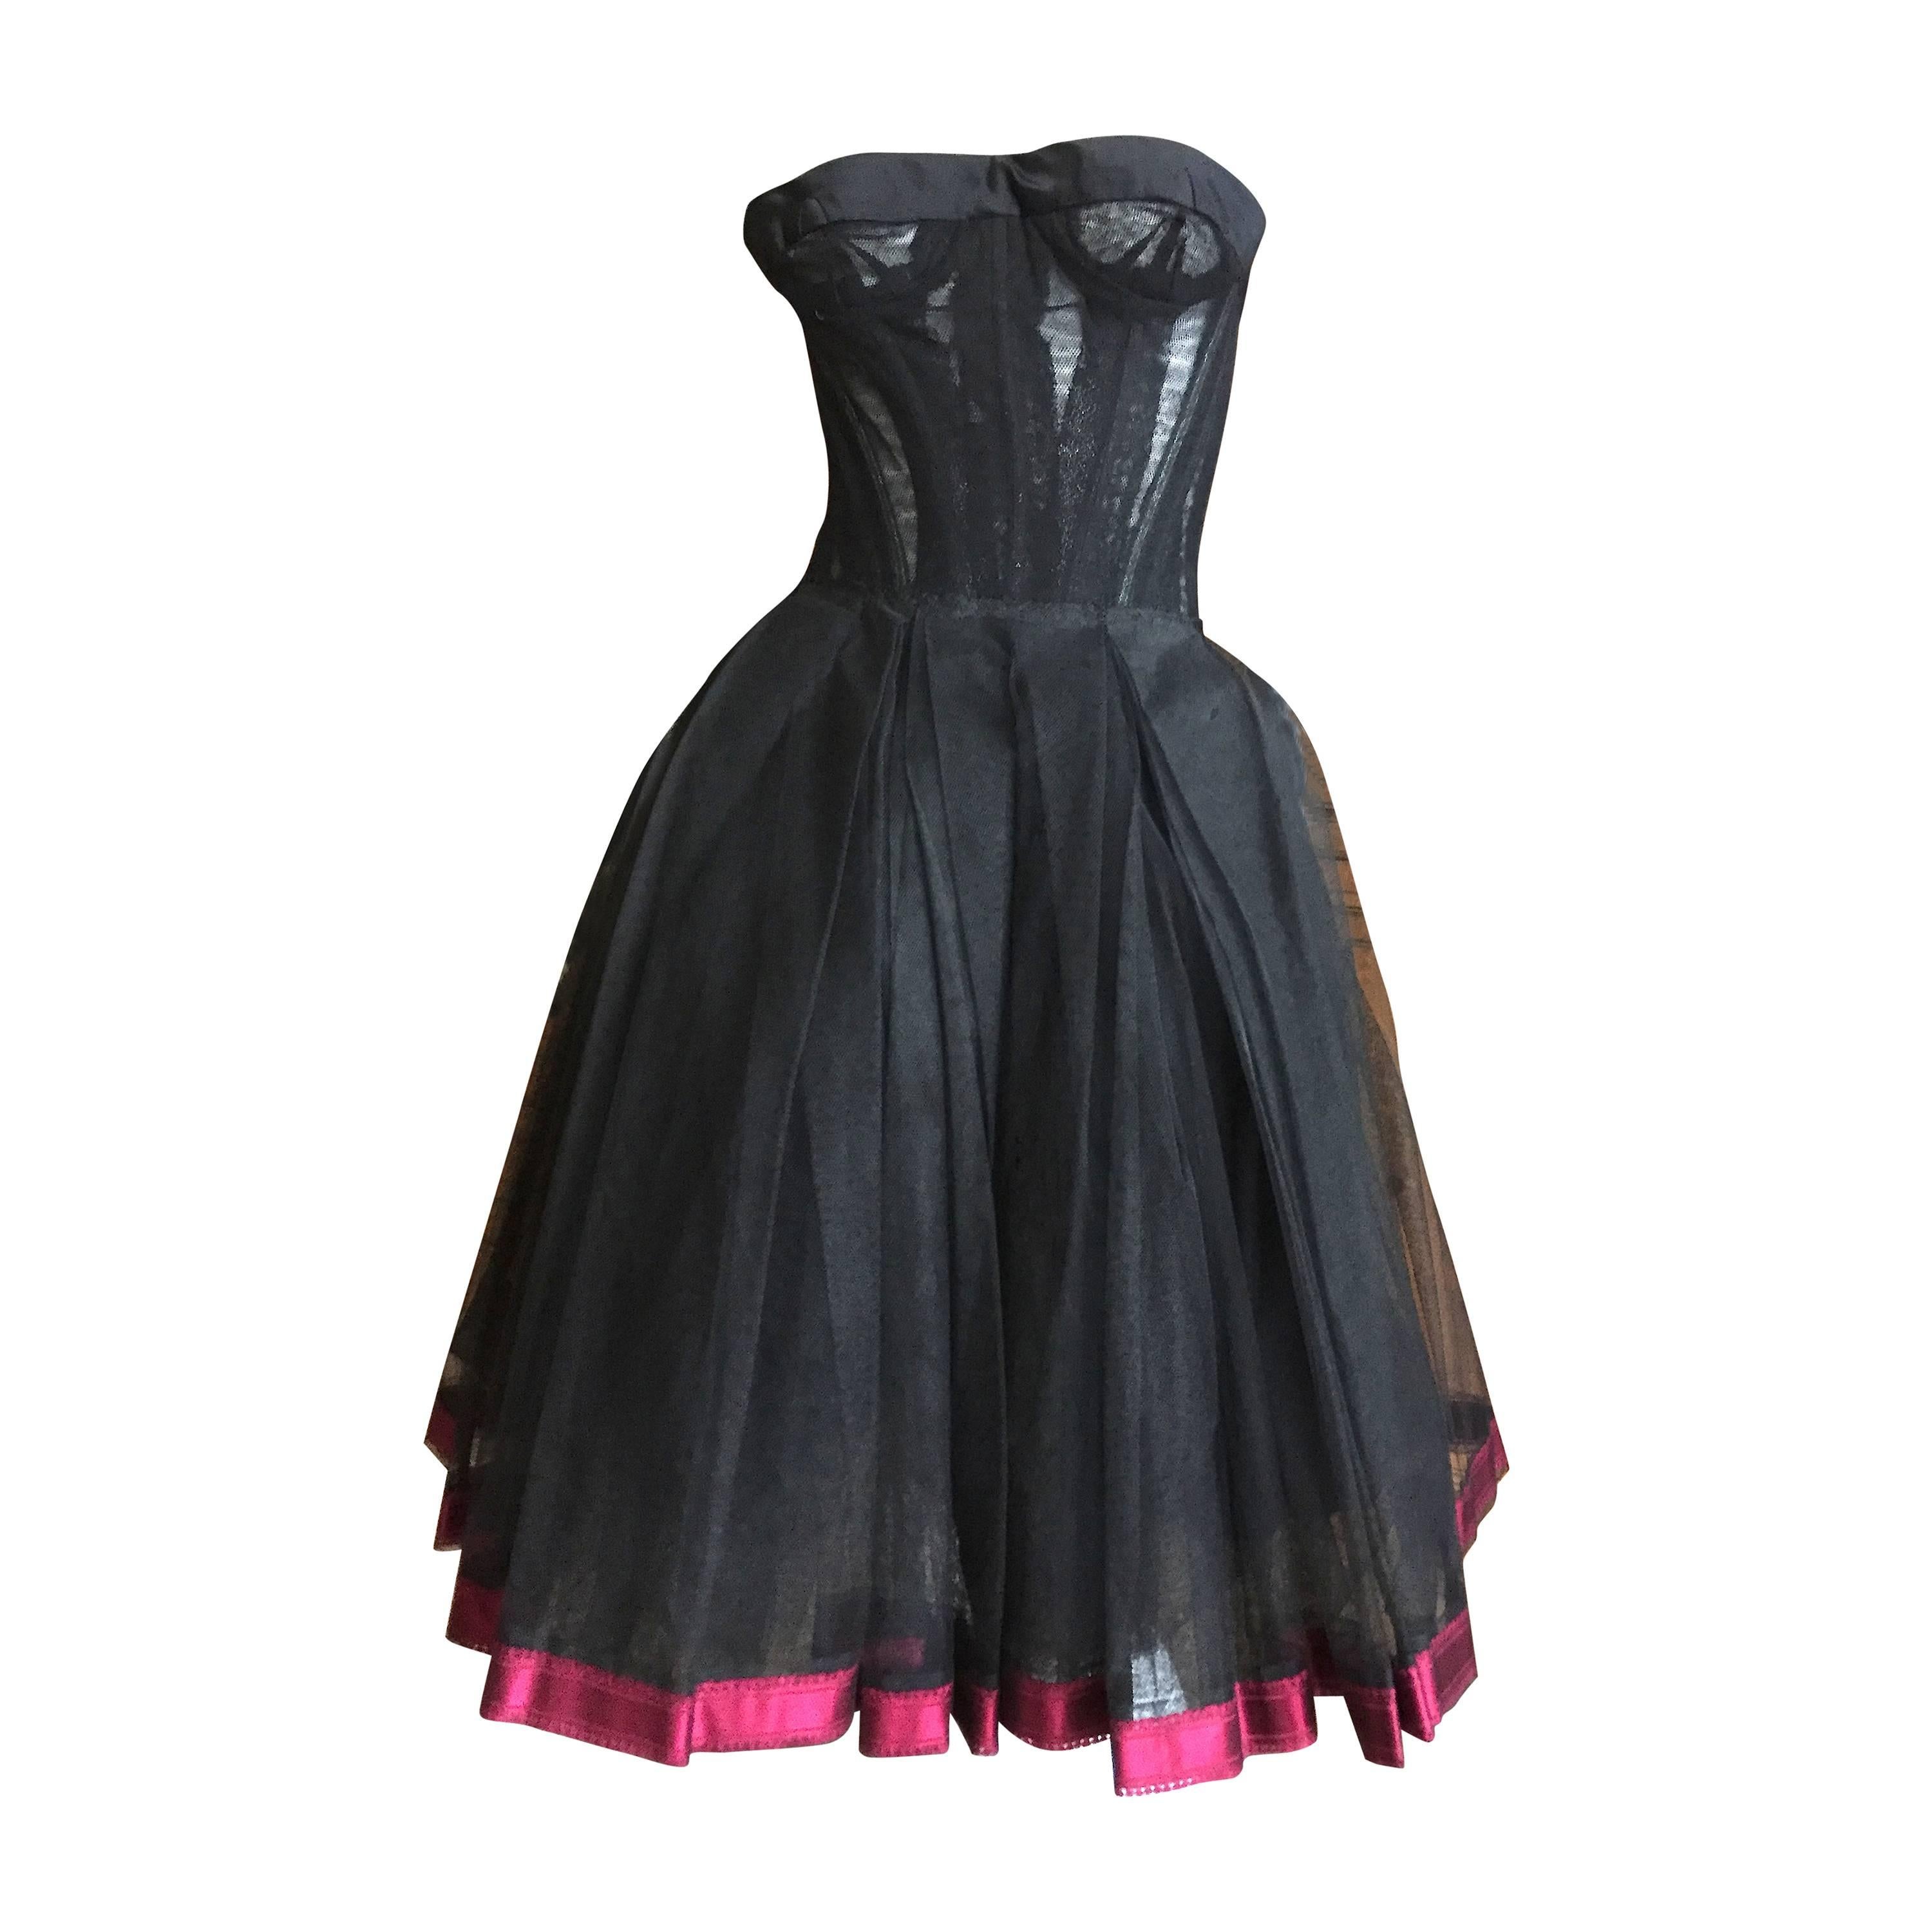 Christian DIor Attr A' 1954 Haute Couture Tulle Boned Bustier Under Dress